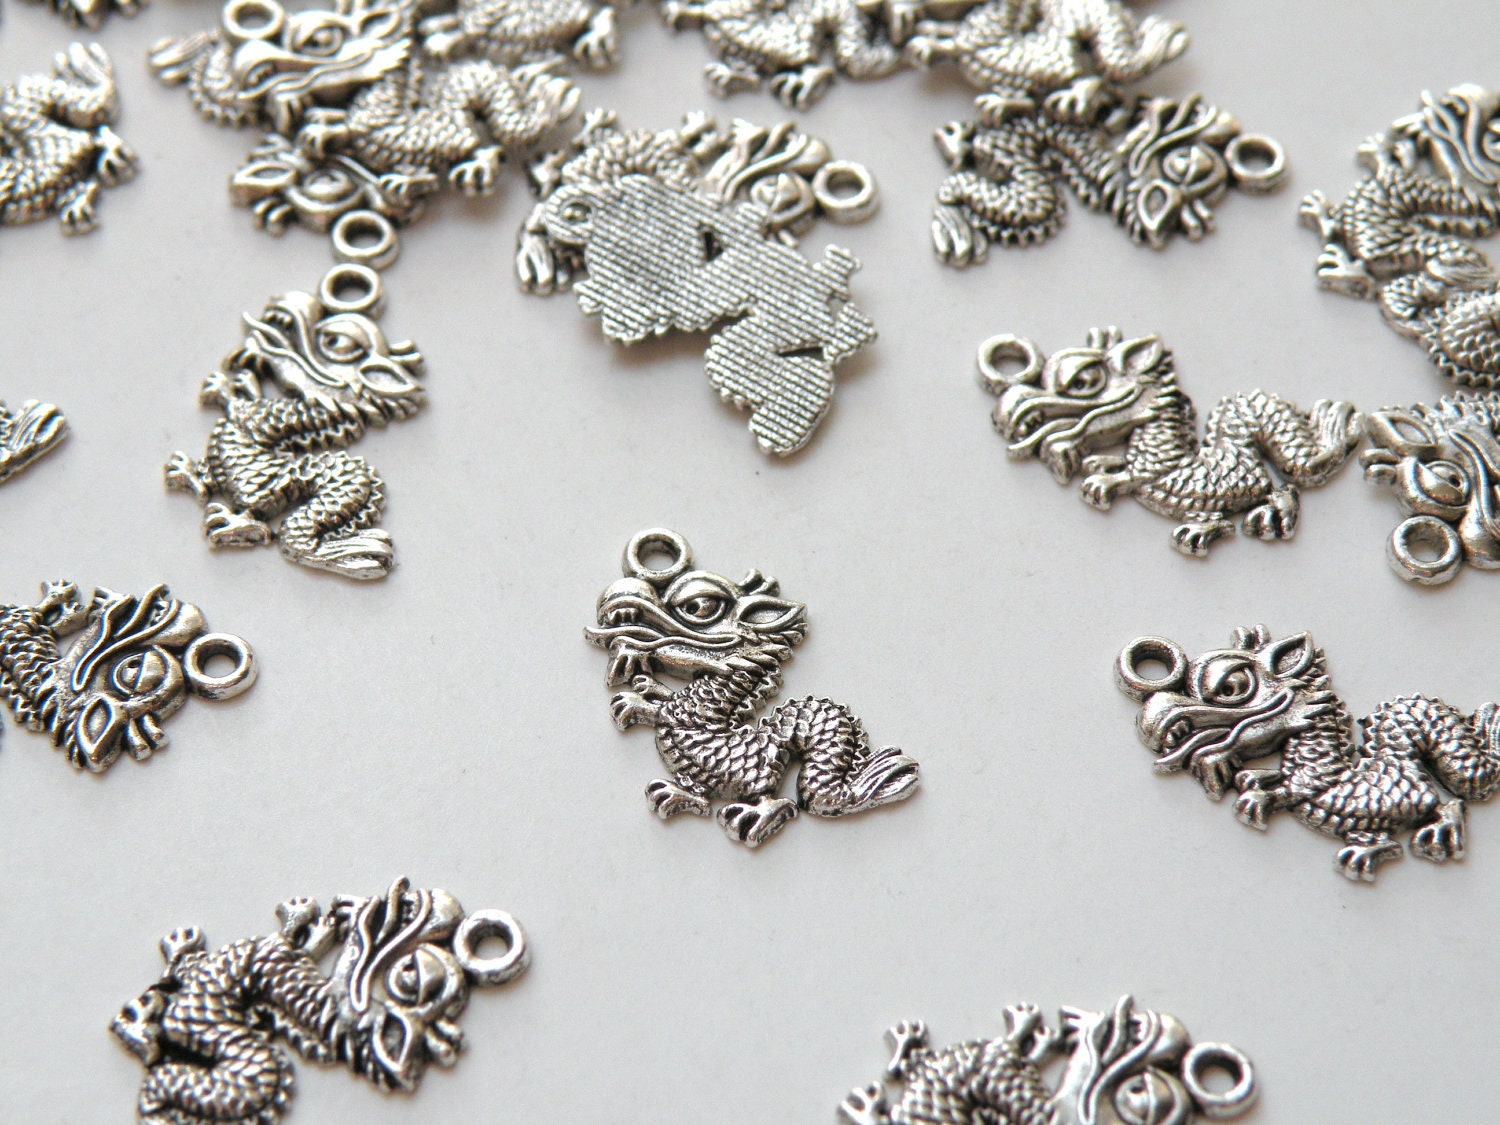 2024 New Year Celebration Charms, Jewelry Making Charms - ILikeWorms Style 1 / 25mm - Large